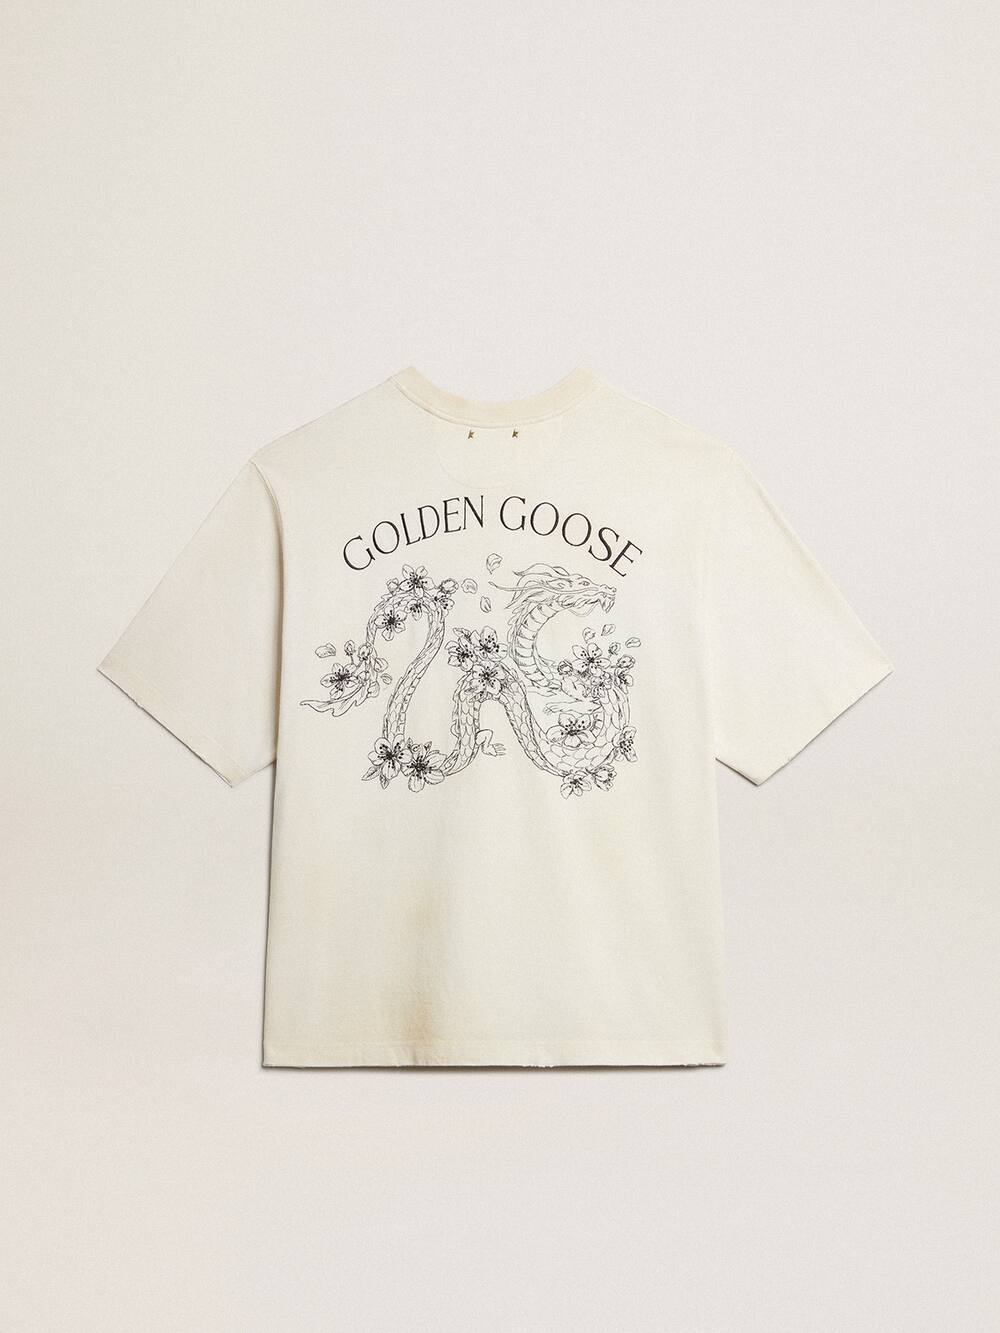 Golden Goose - T-Shirt CNY in Lived-in-White in 